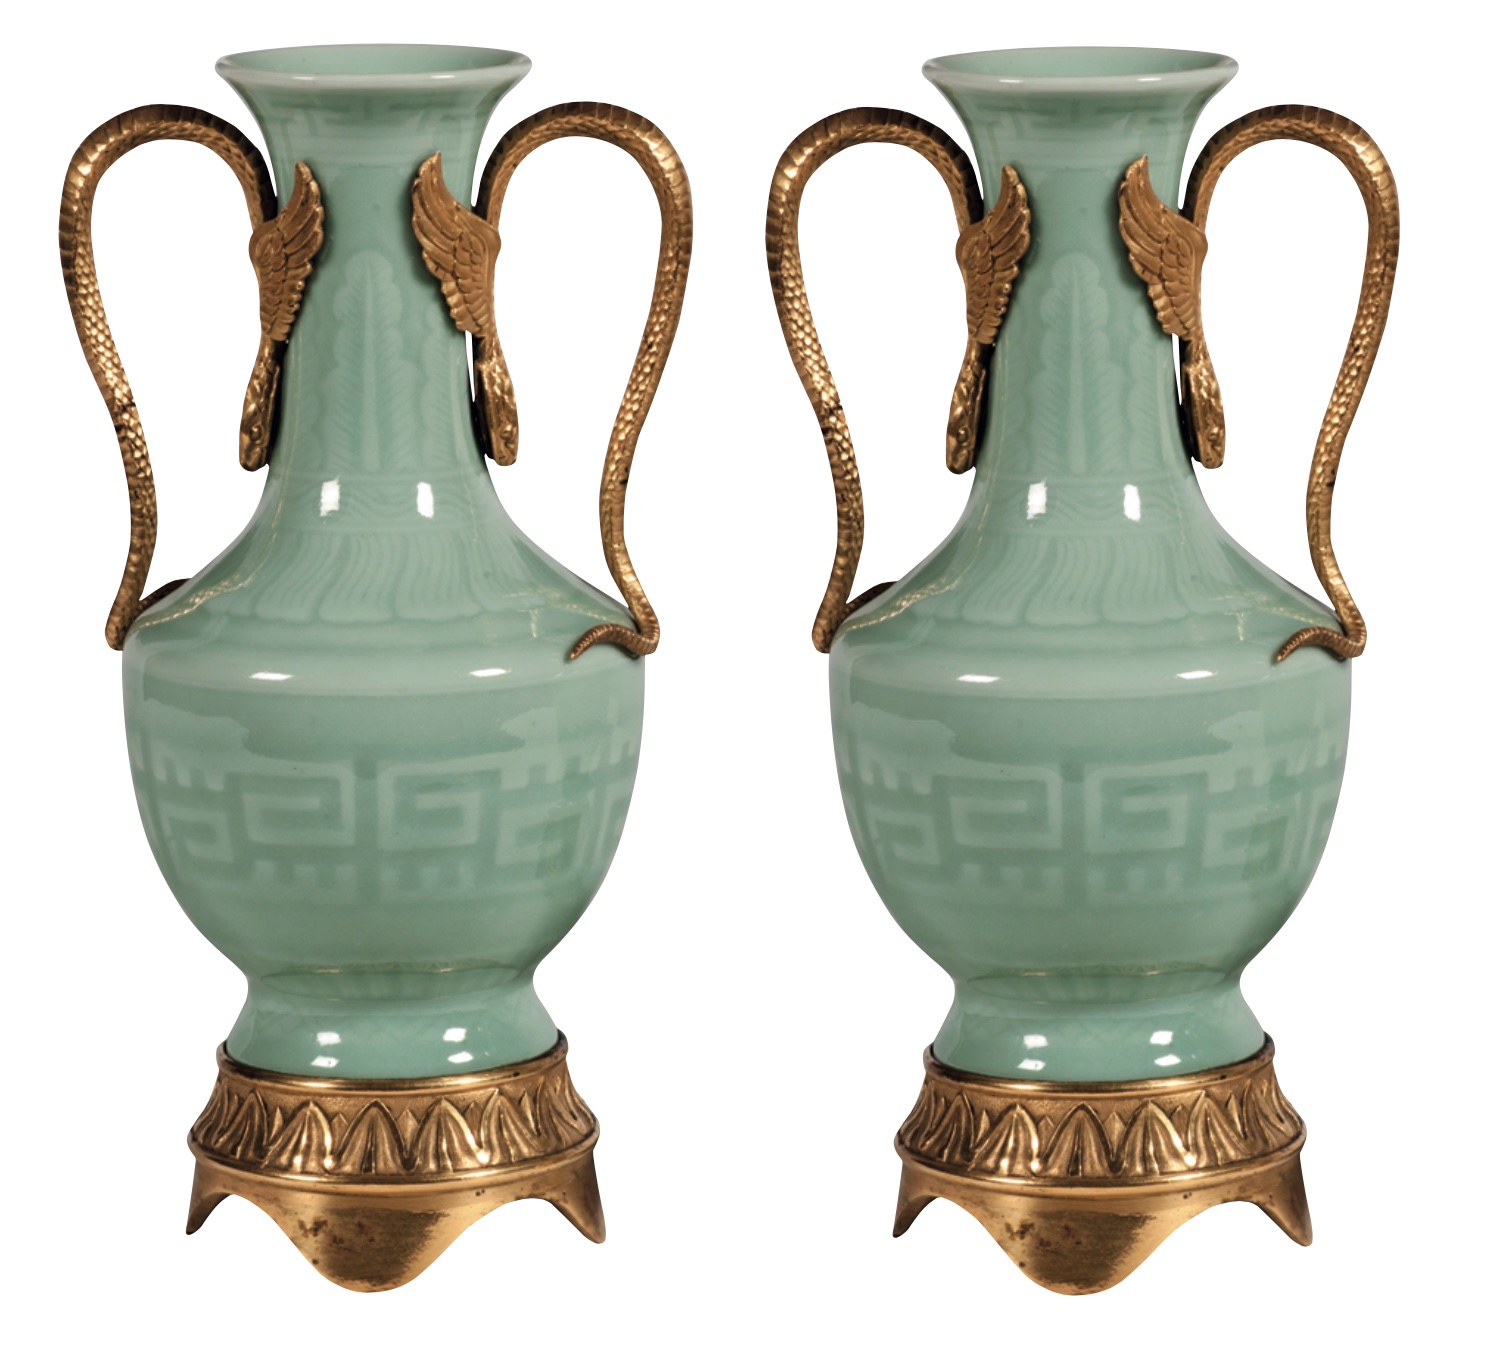 A pair of 18th-century Chinese celadon baluster vases mounted with gilt-bronze